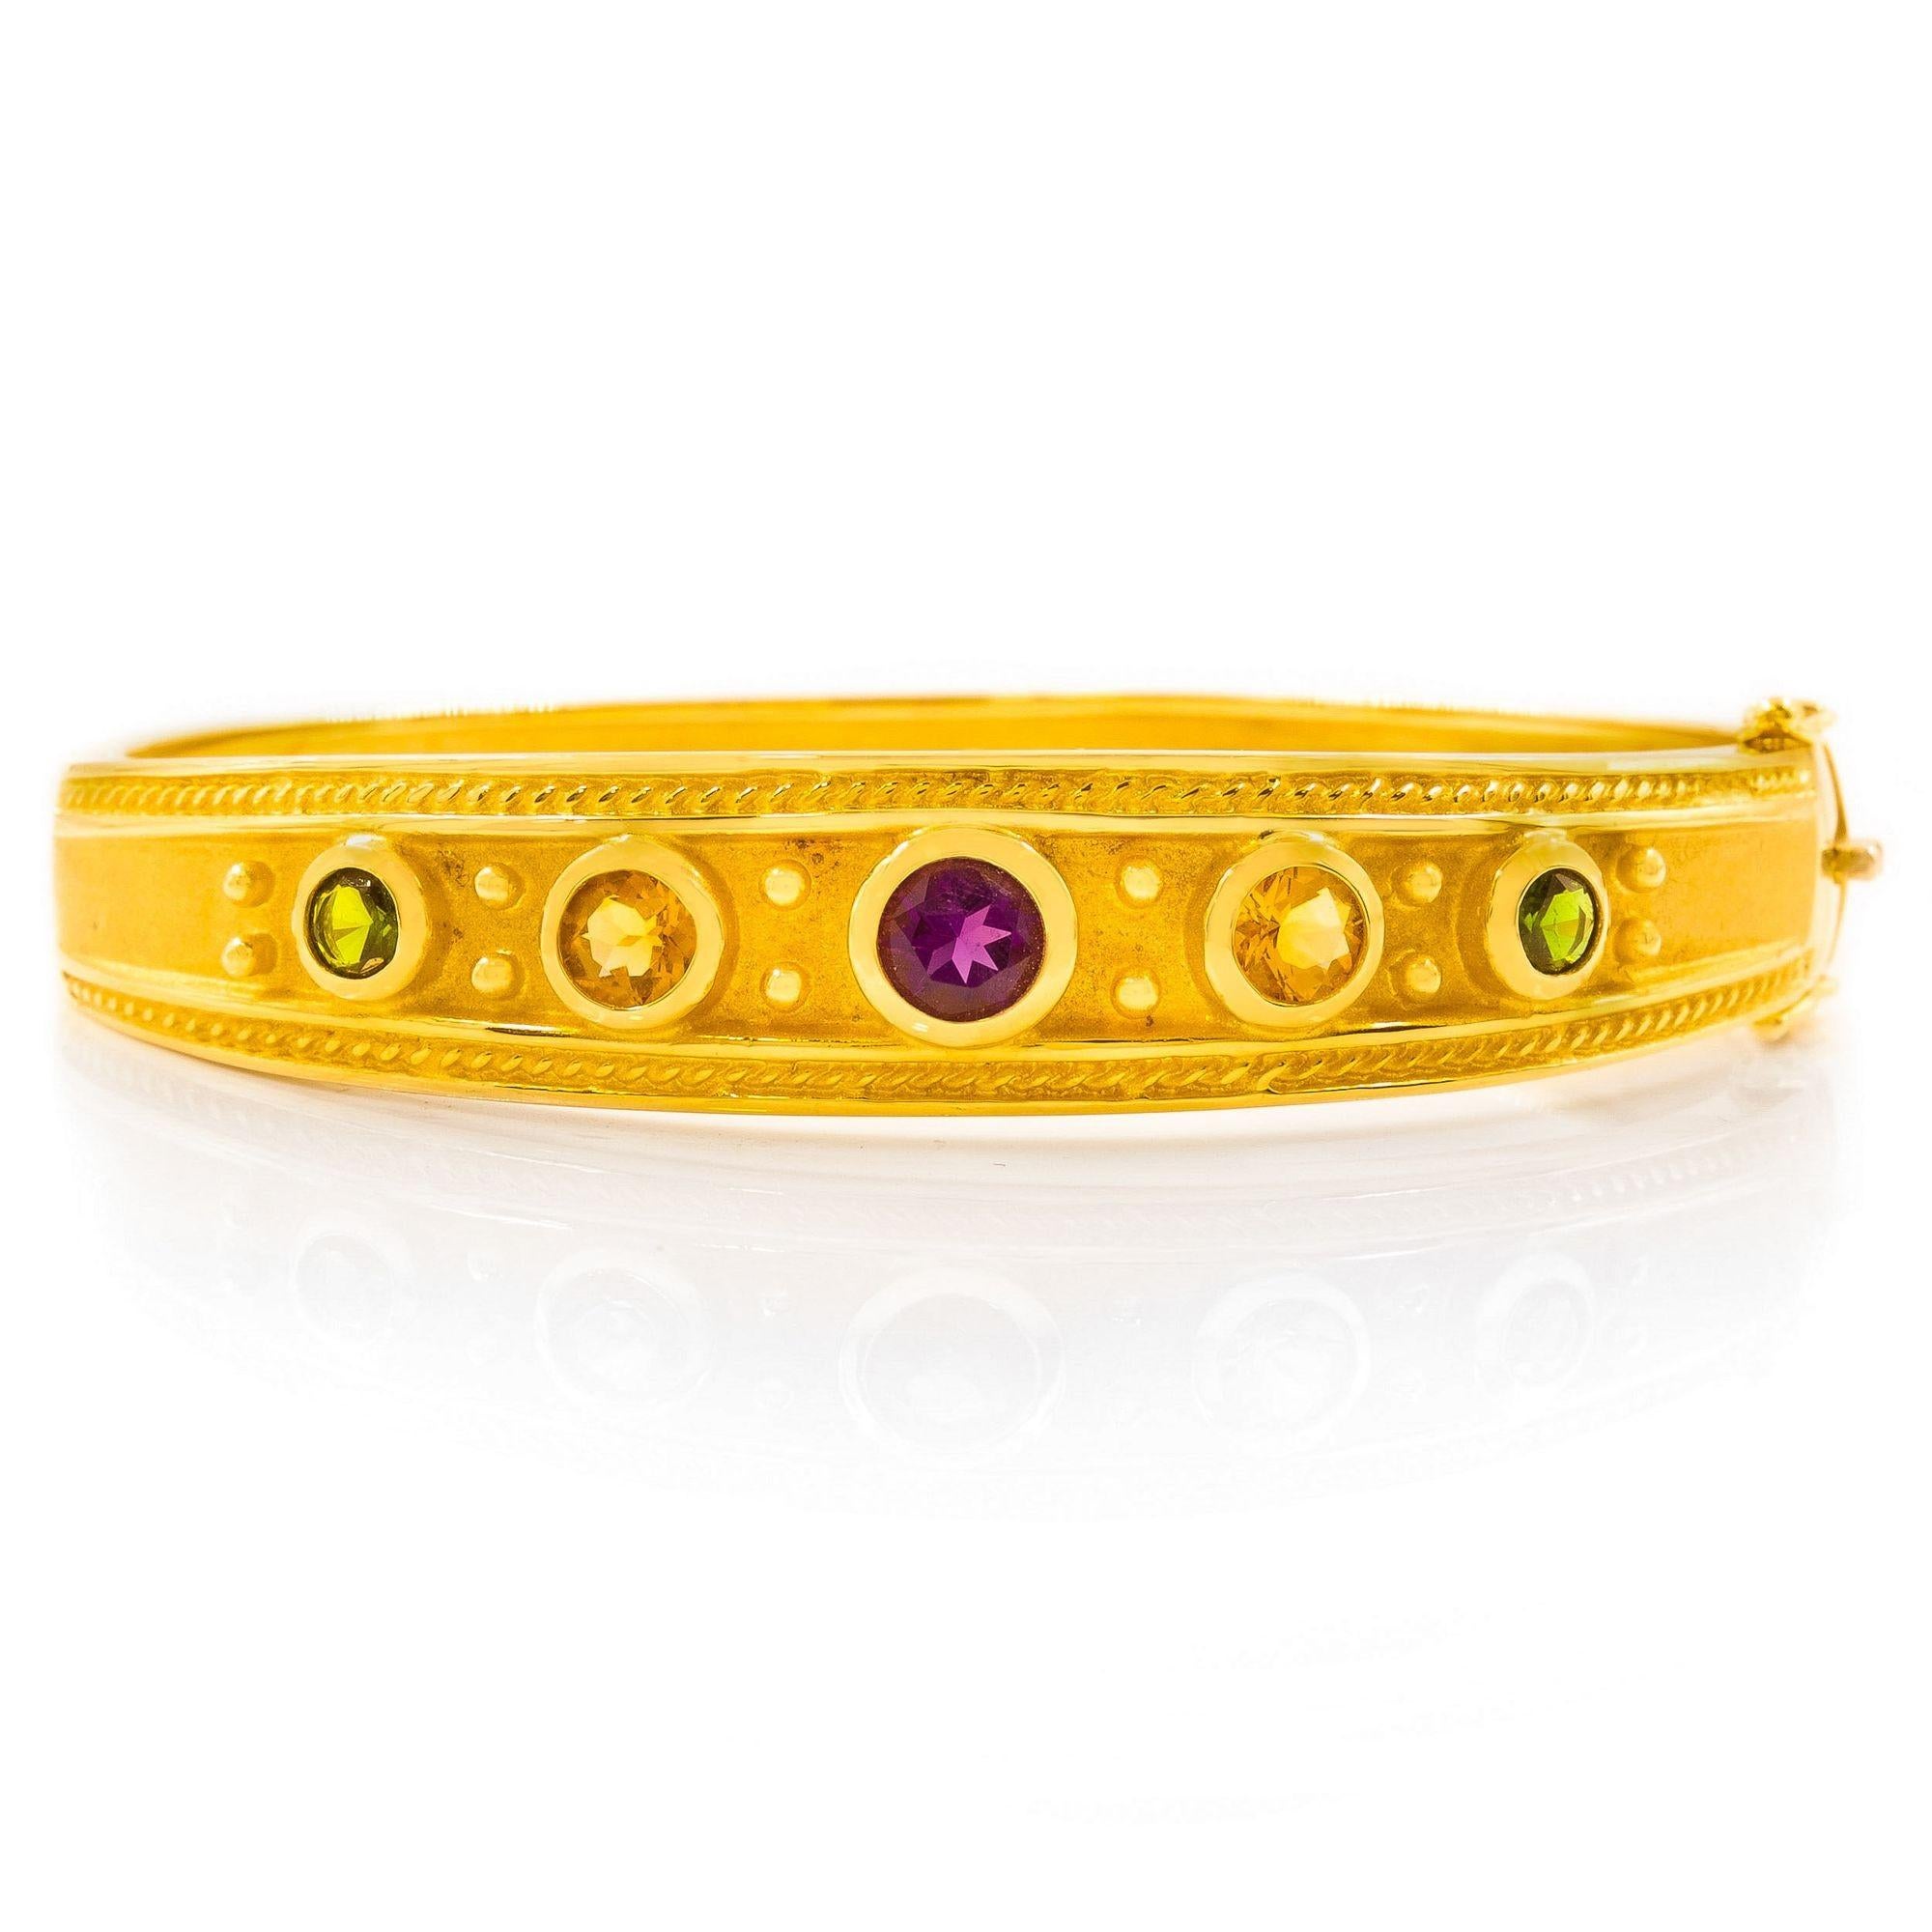 A FINELY CAST SOLID 14 KARAT GOLD GEMSET BANGLE BRACELET
Item # C104266

An exquisite solid 14 karat yellow gold bracelet, the body is cast with a wonderful variation of textures and three-dimensional elements: the lowest ground of the bracelet is a